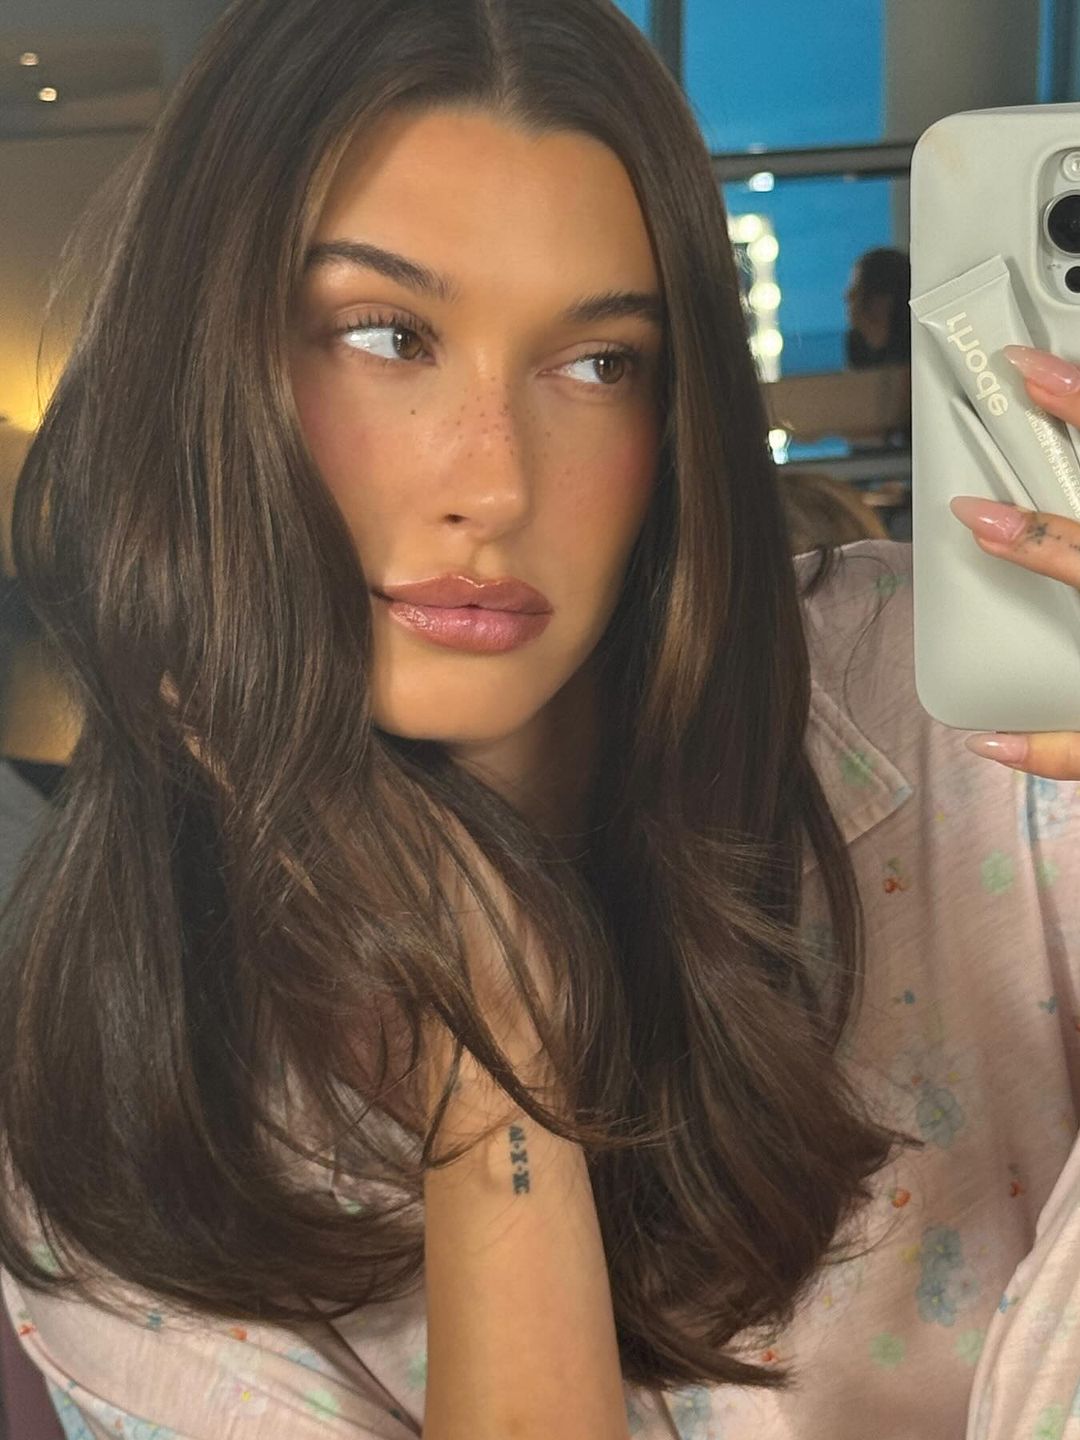 Hailey Bieber shares a mirror selfie of her new brunette hairstyle 